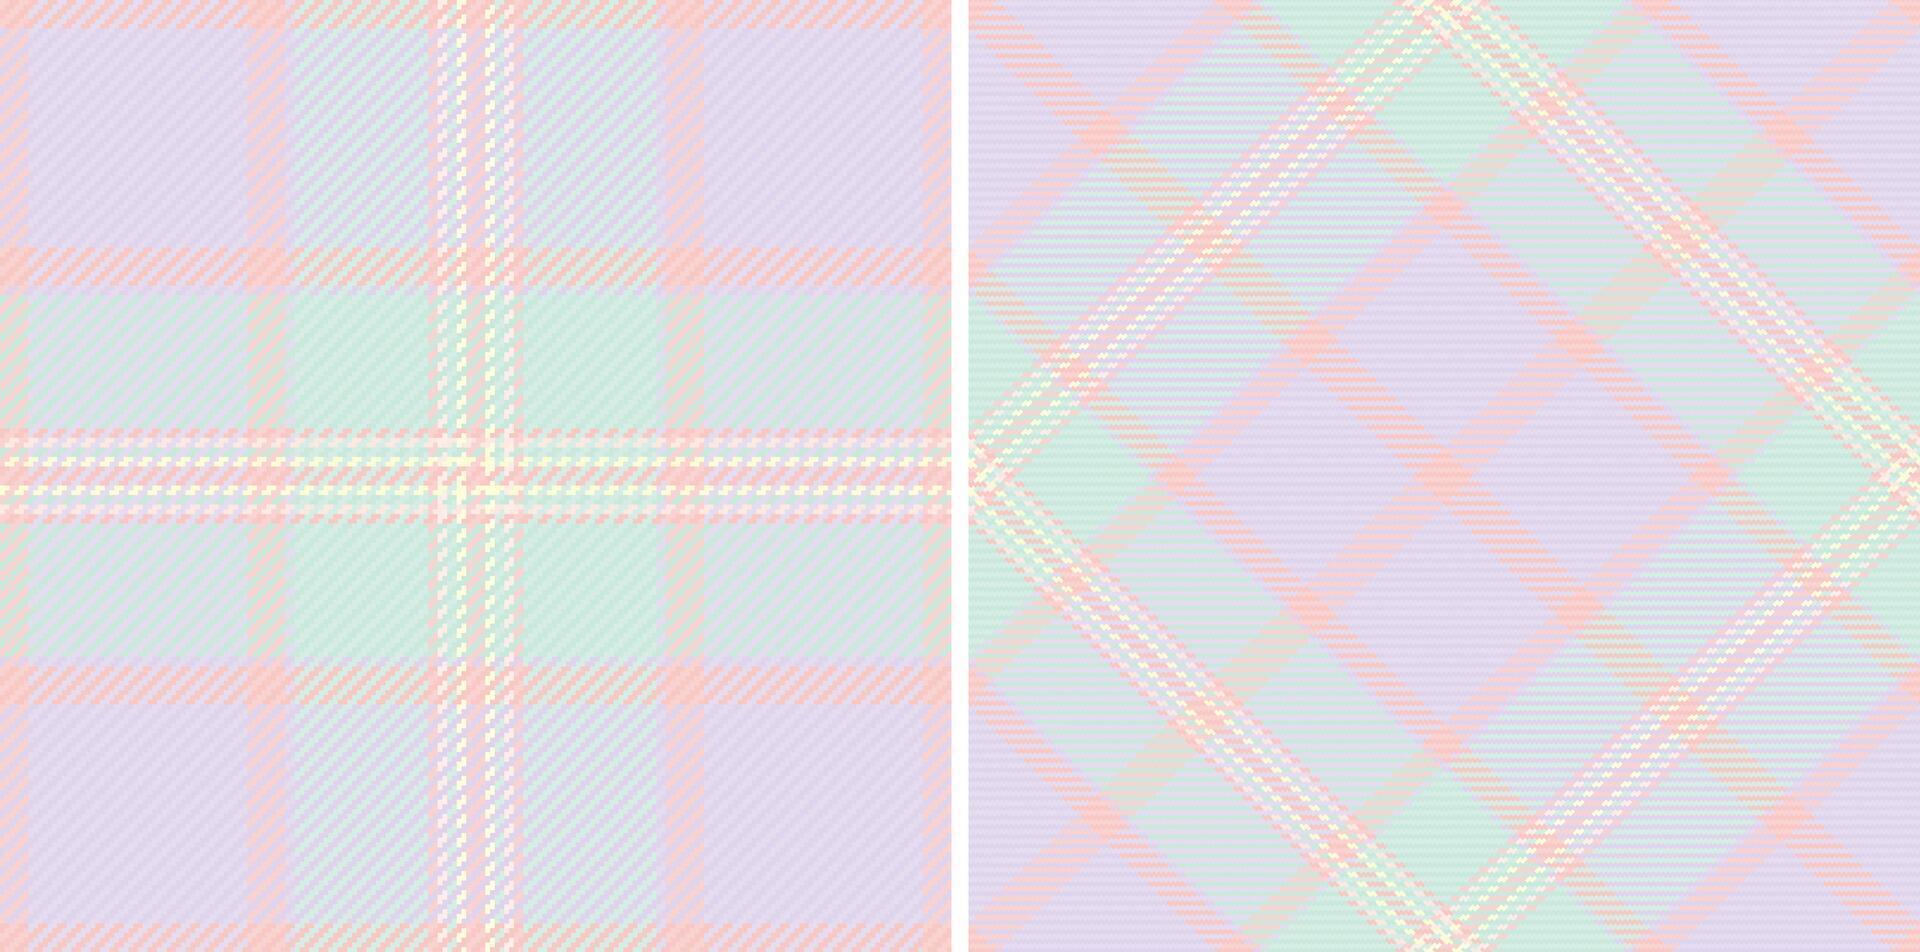 Pattern vector background of textile texture fabric with a check seamless plaid tartan. Set in fashionable colors for luxury modern curtain designs living room.